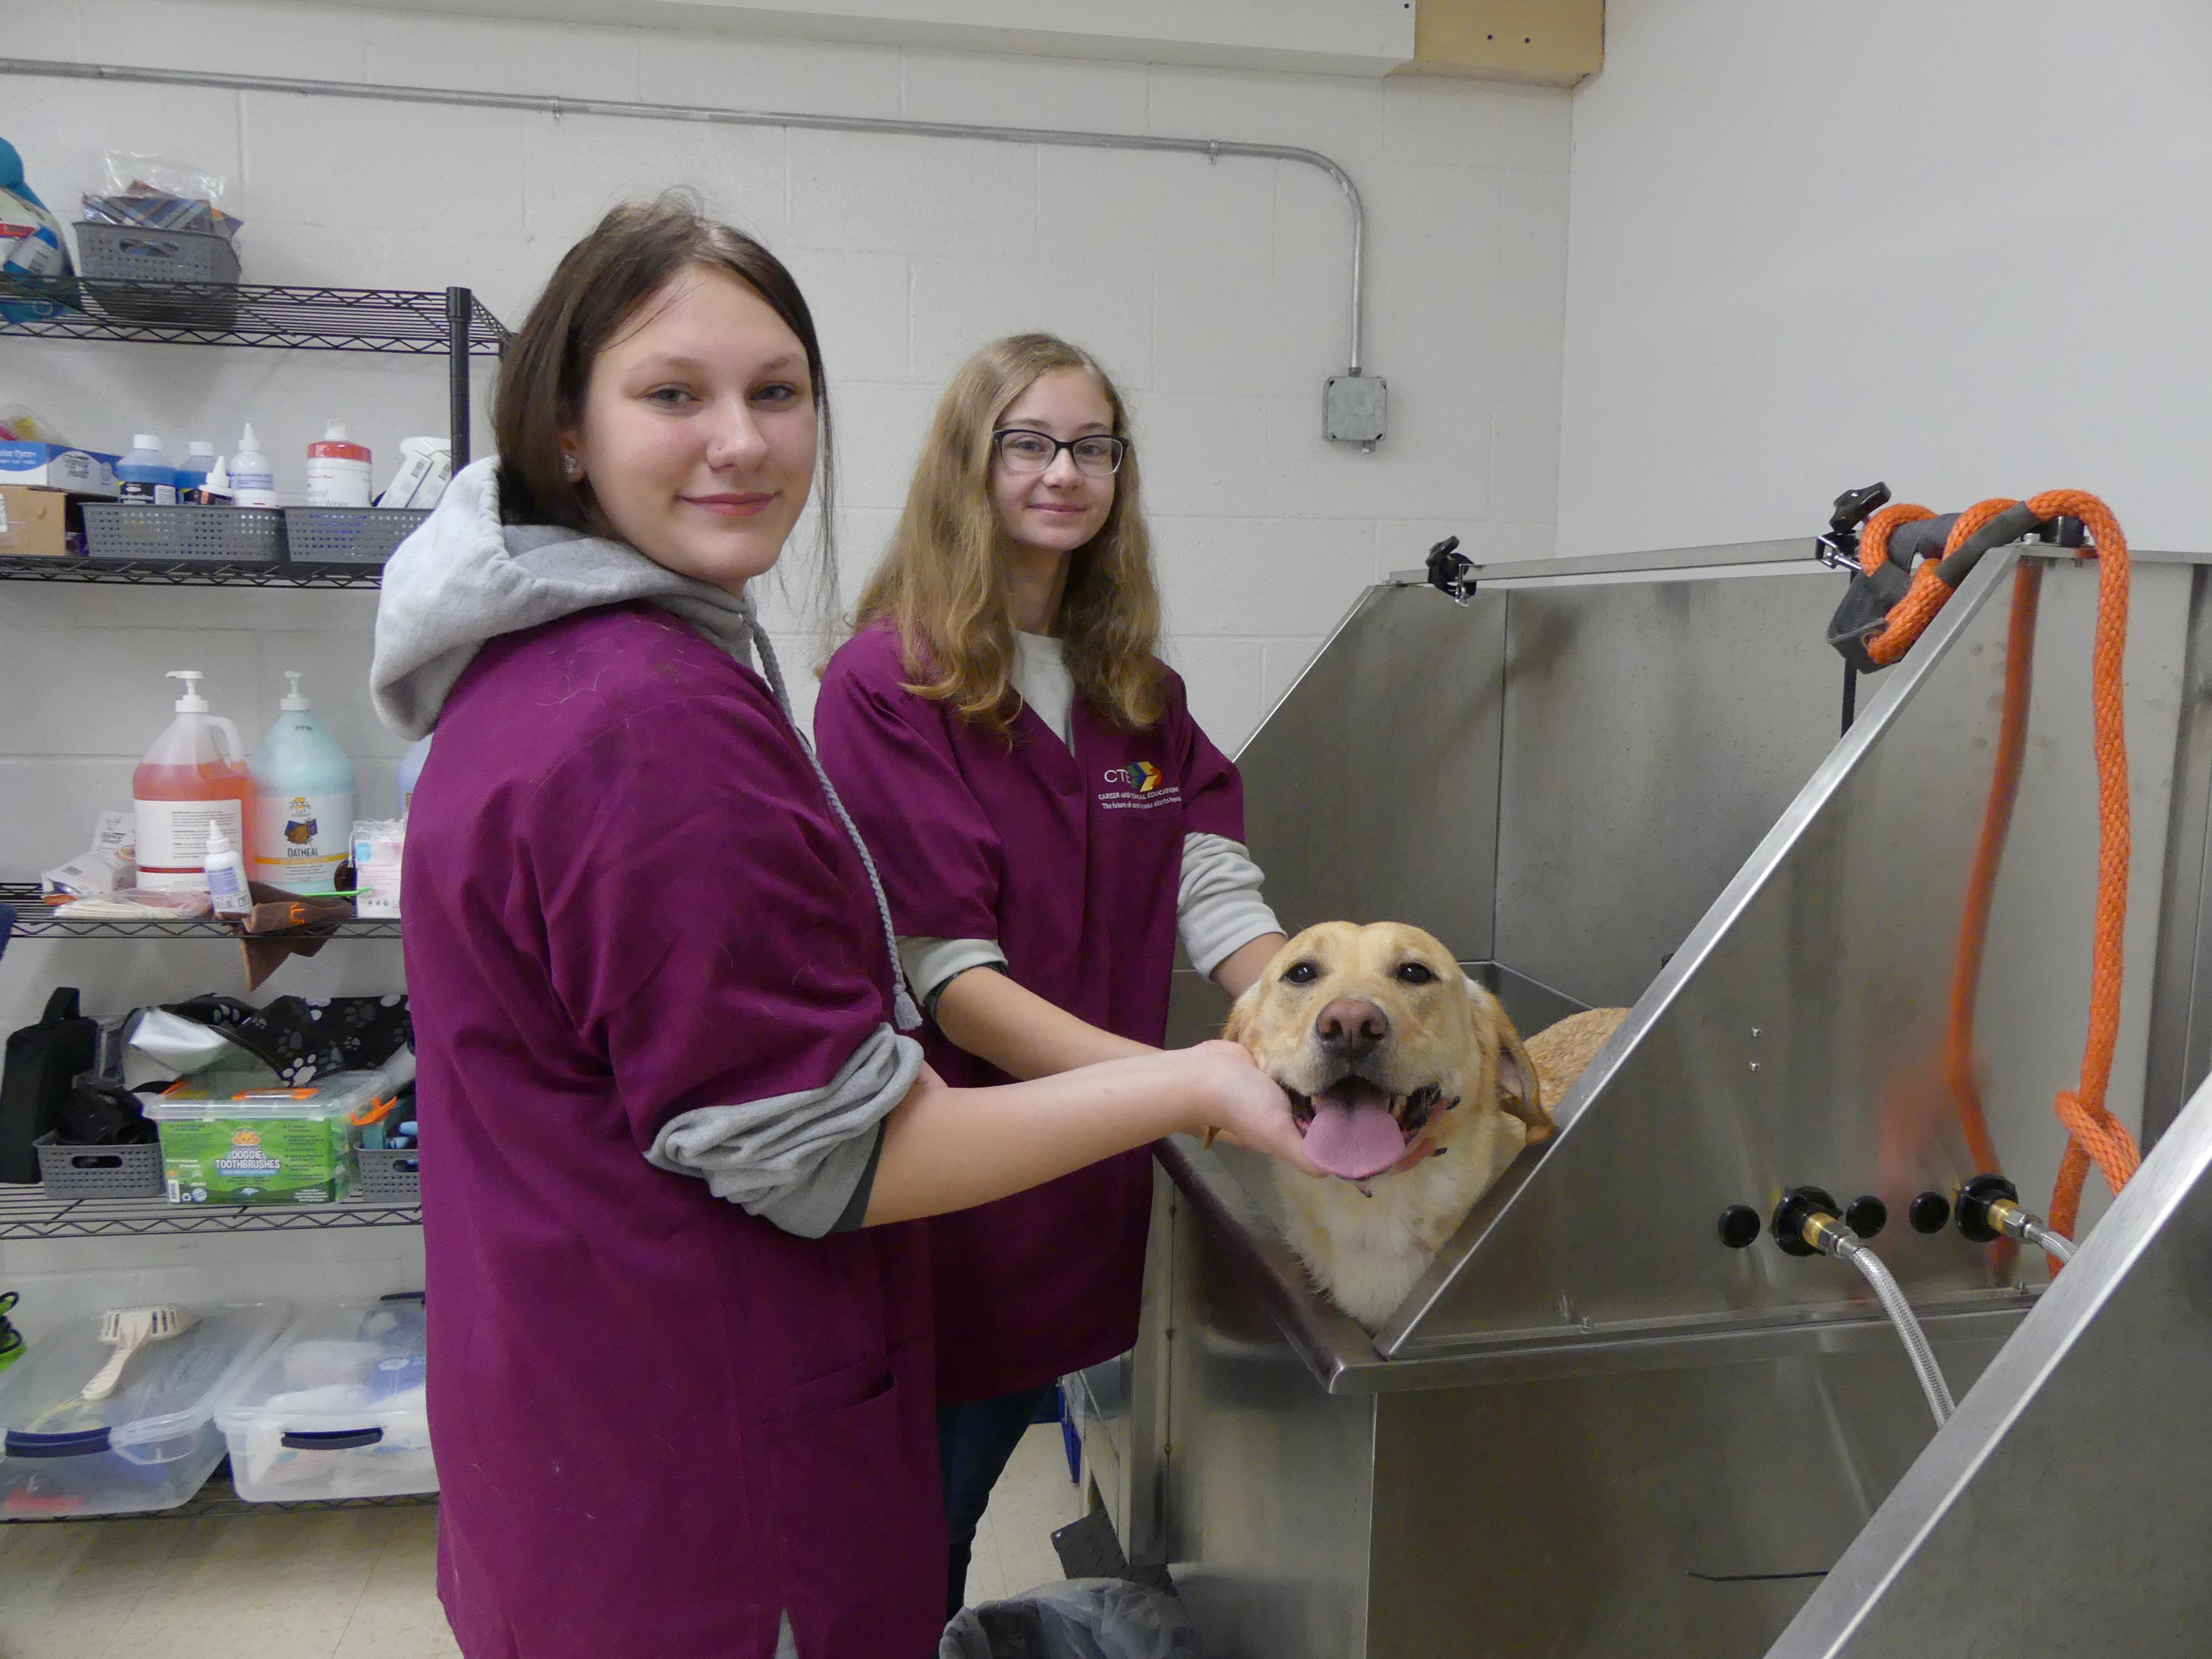 2 students grooming a dog